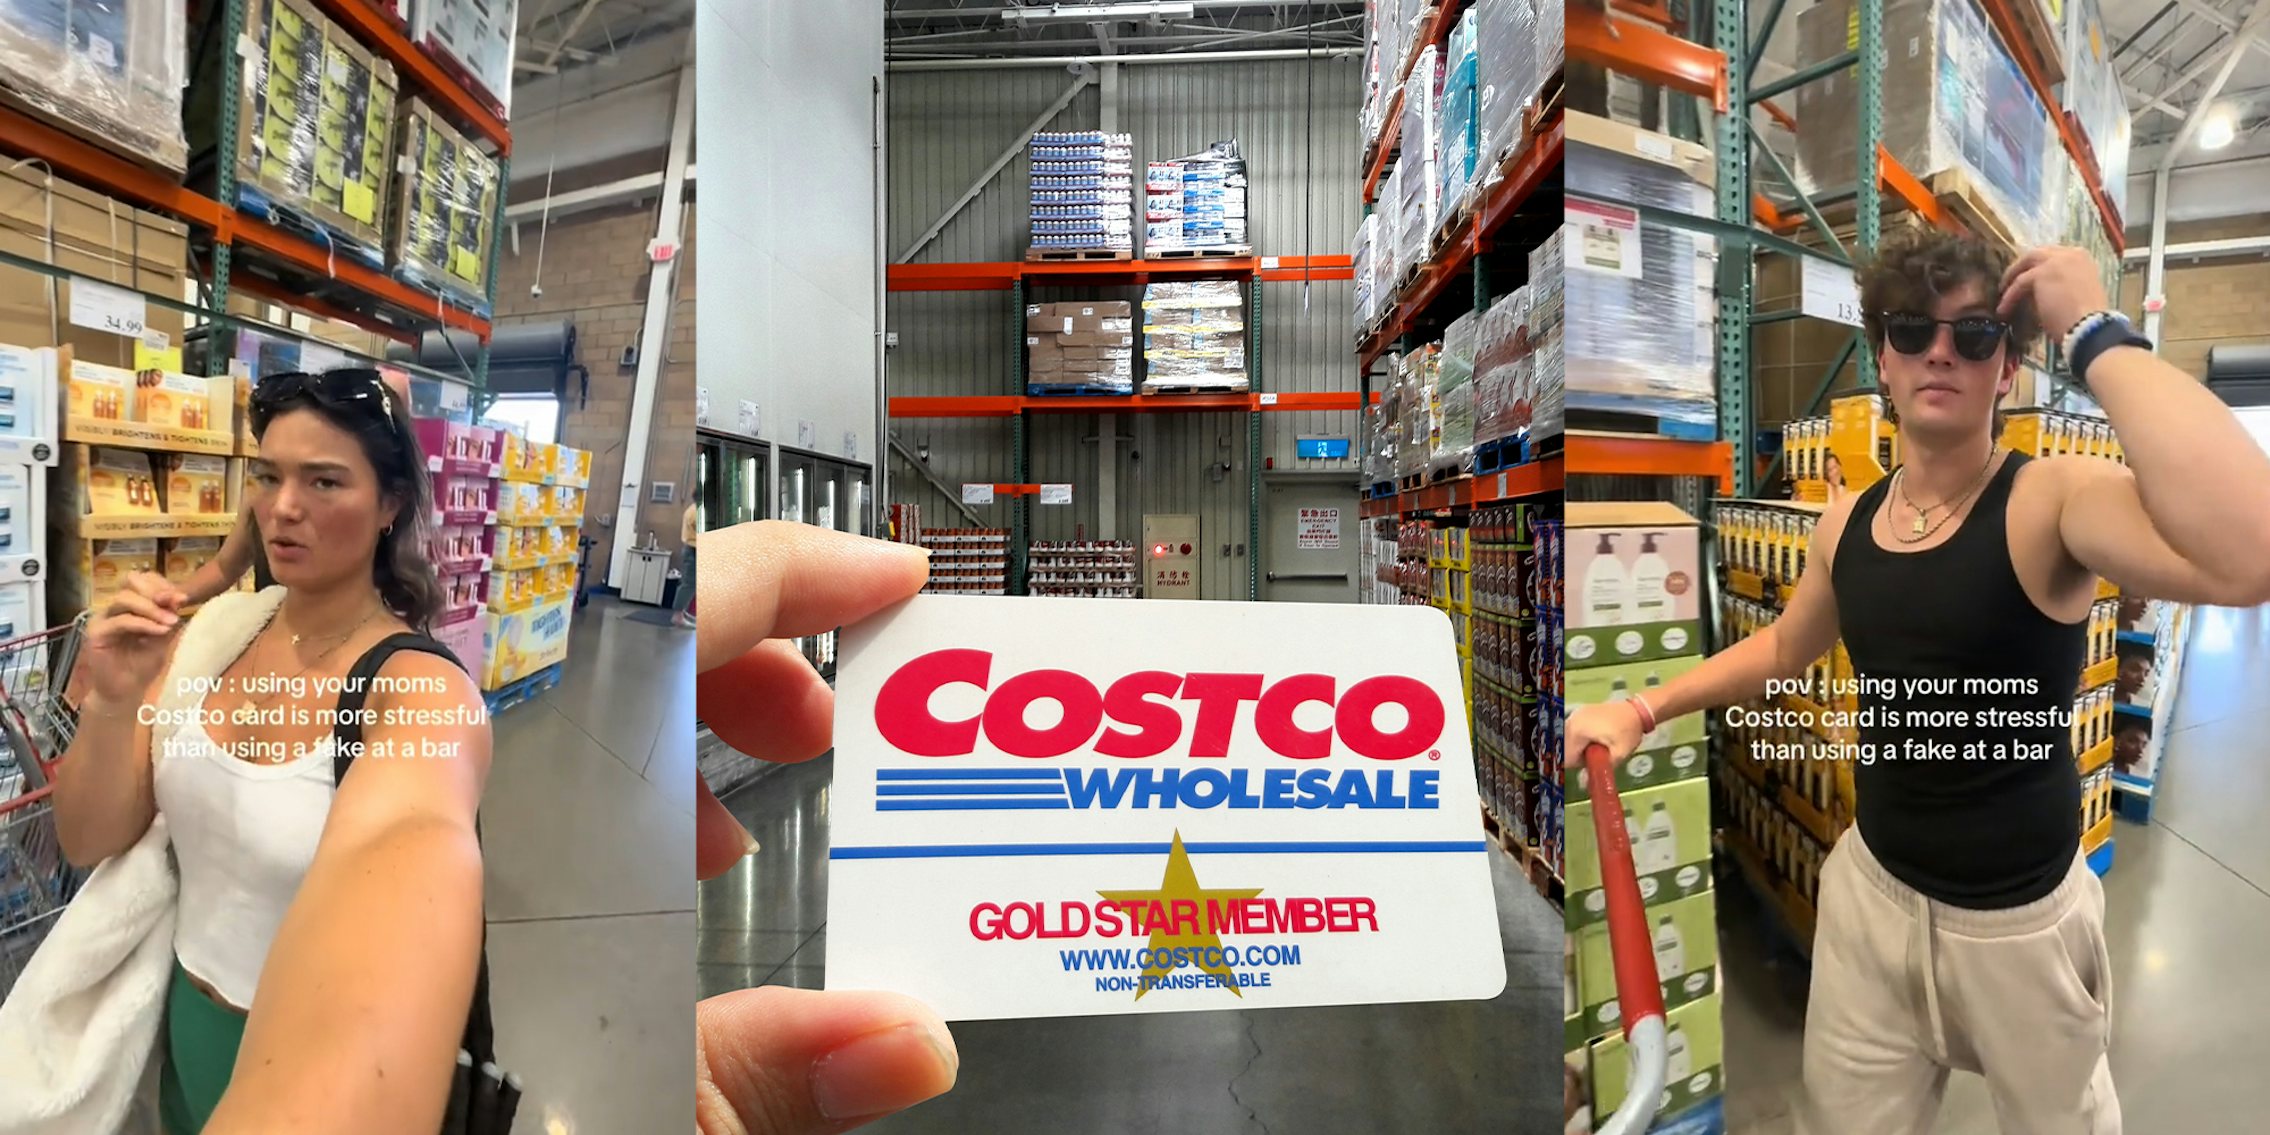 using your mom's costco card is more stressful than using a fake at a bar